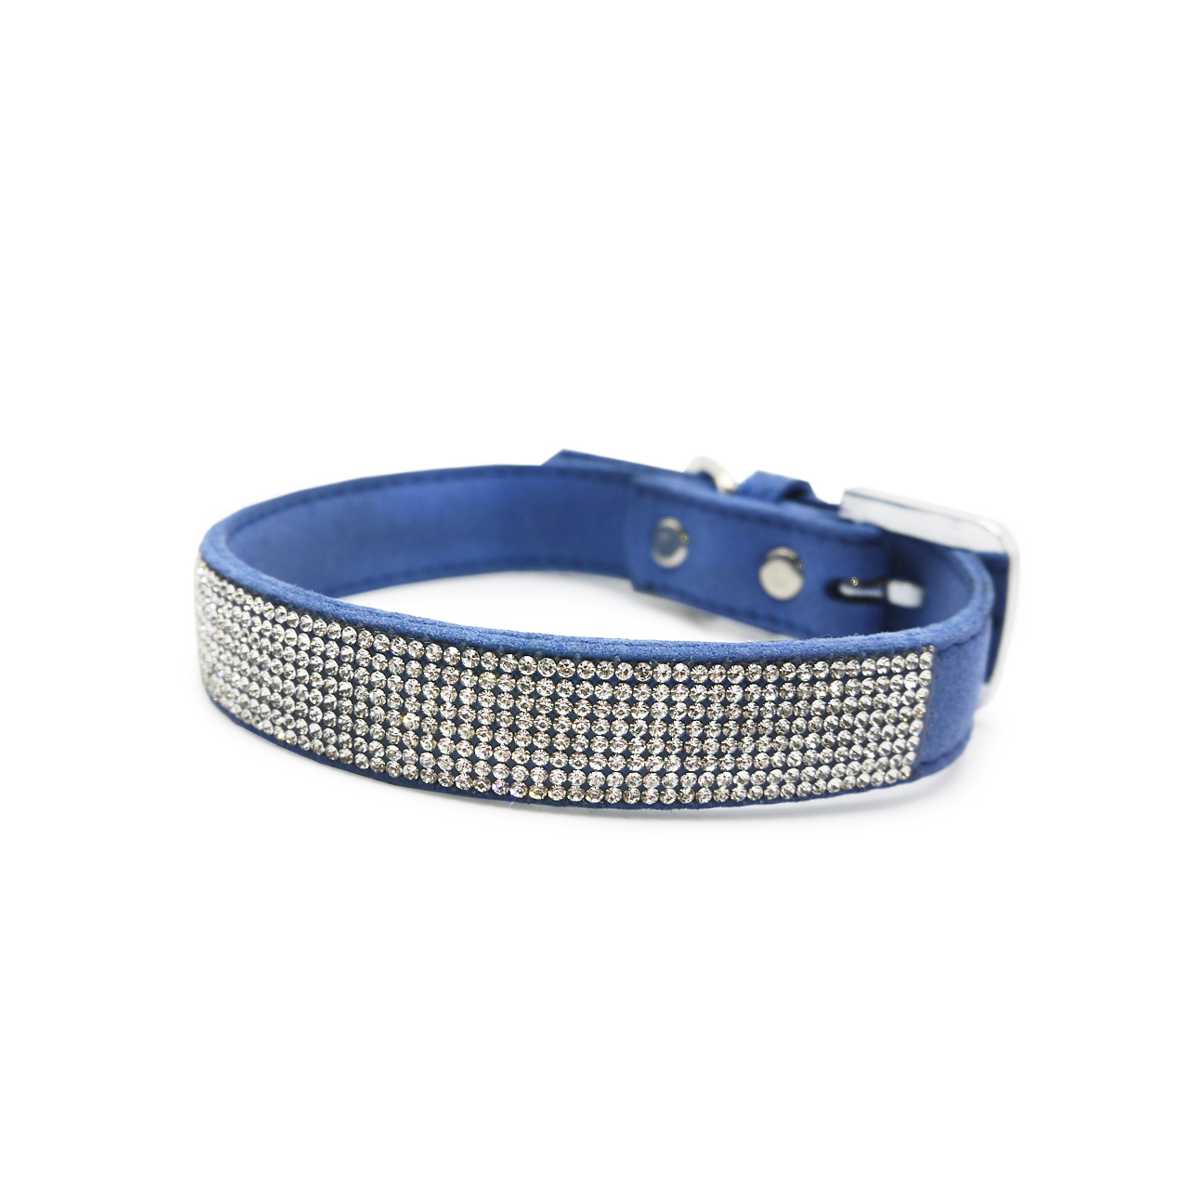 VIP Bling Collar in Blue with Rhinestone Studded Buckle | Pawlicious & Company